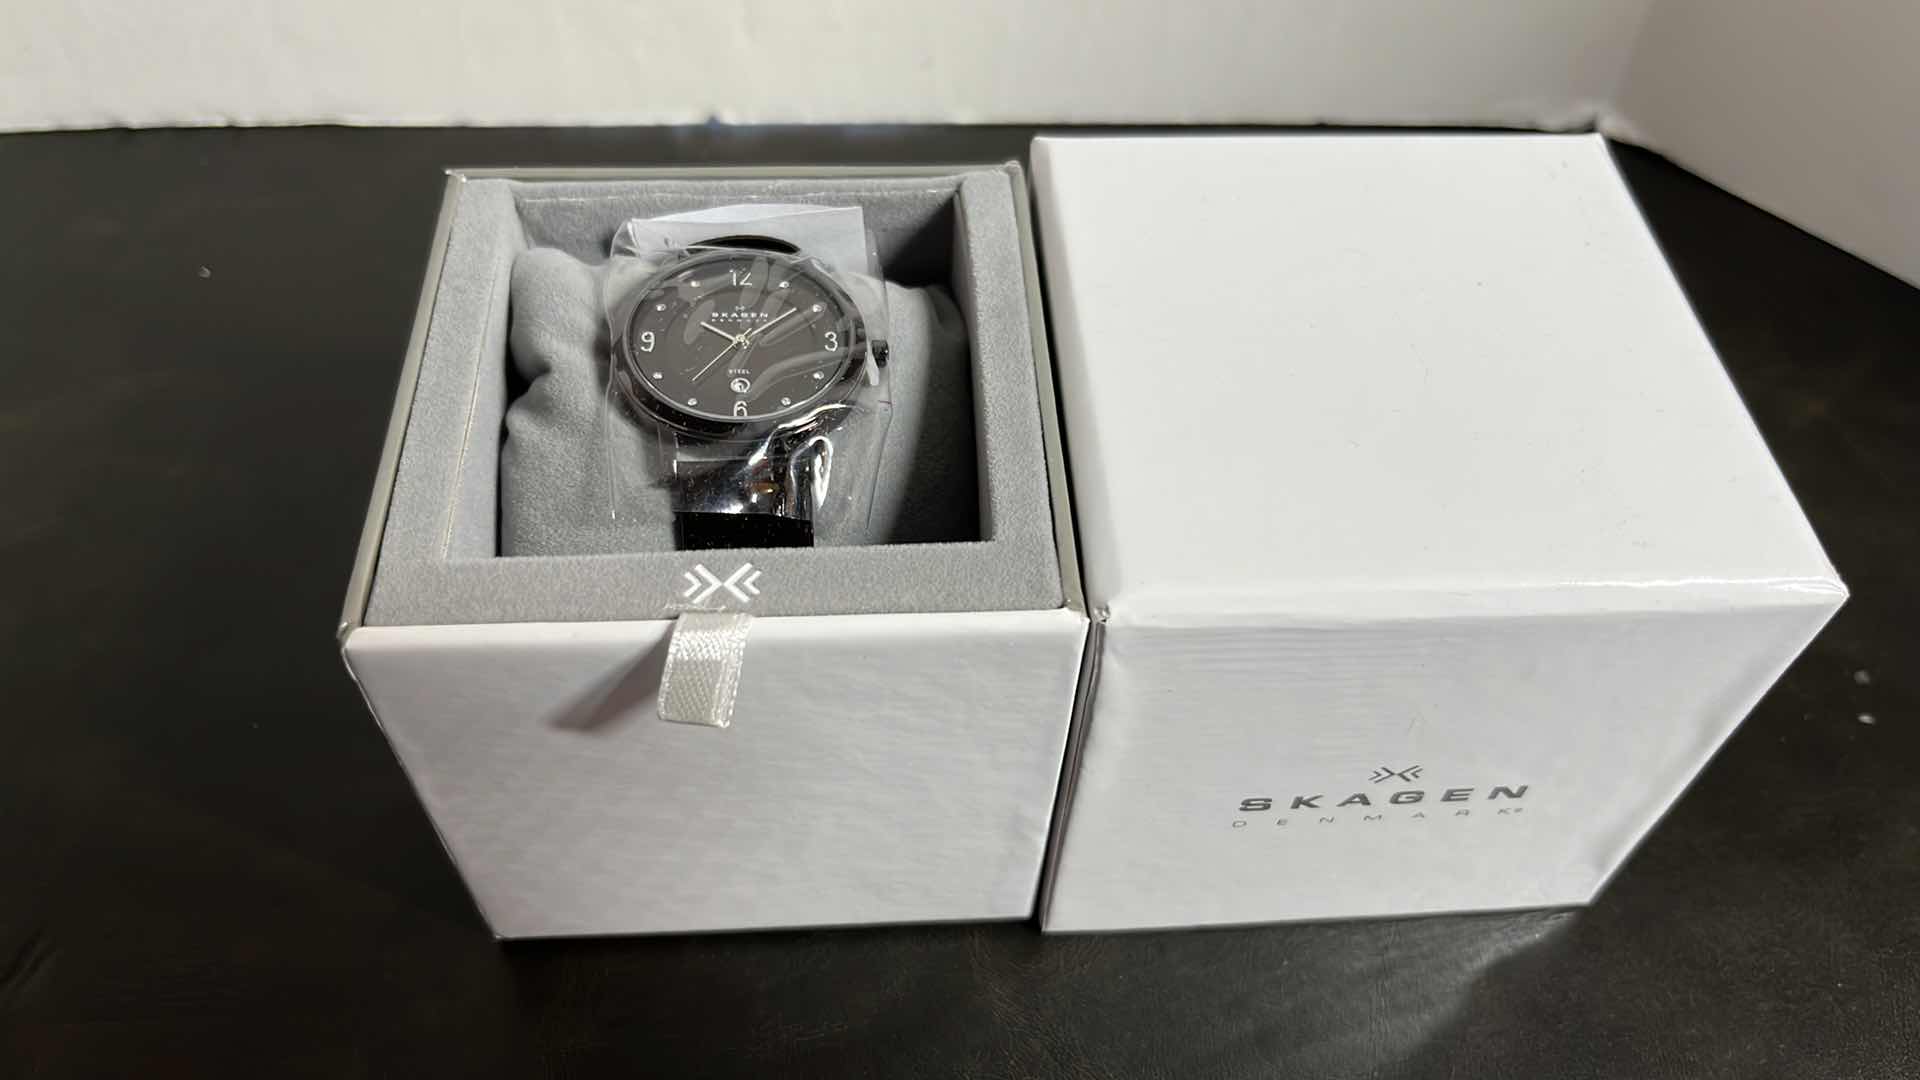 Photo 1 of NEW WOMENS SKAGEN STEEL WATCH W STAINLESS STEEL CASE & GENUINE LEATHER STRAP, PURPLE MOTHER OF PEARL INLAY W SWAROVSKI CRYSTALS, INCLUDES ORIGINAL BOX MODEL 574SDLD8A